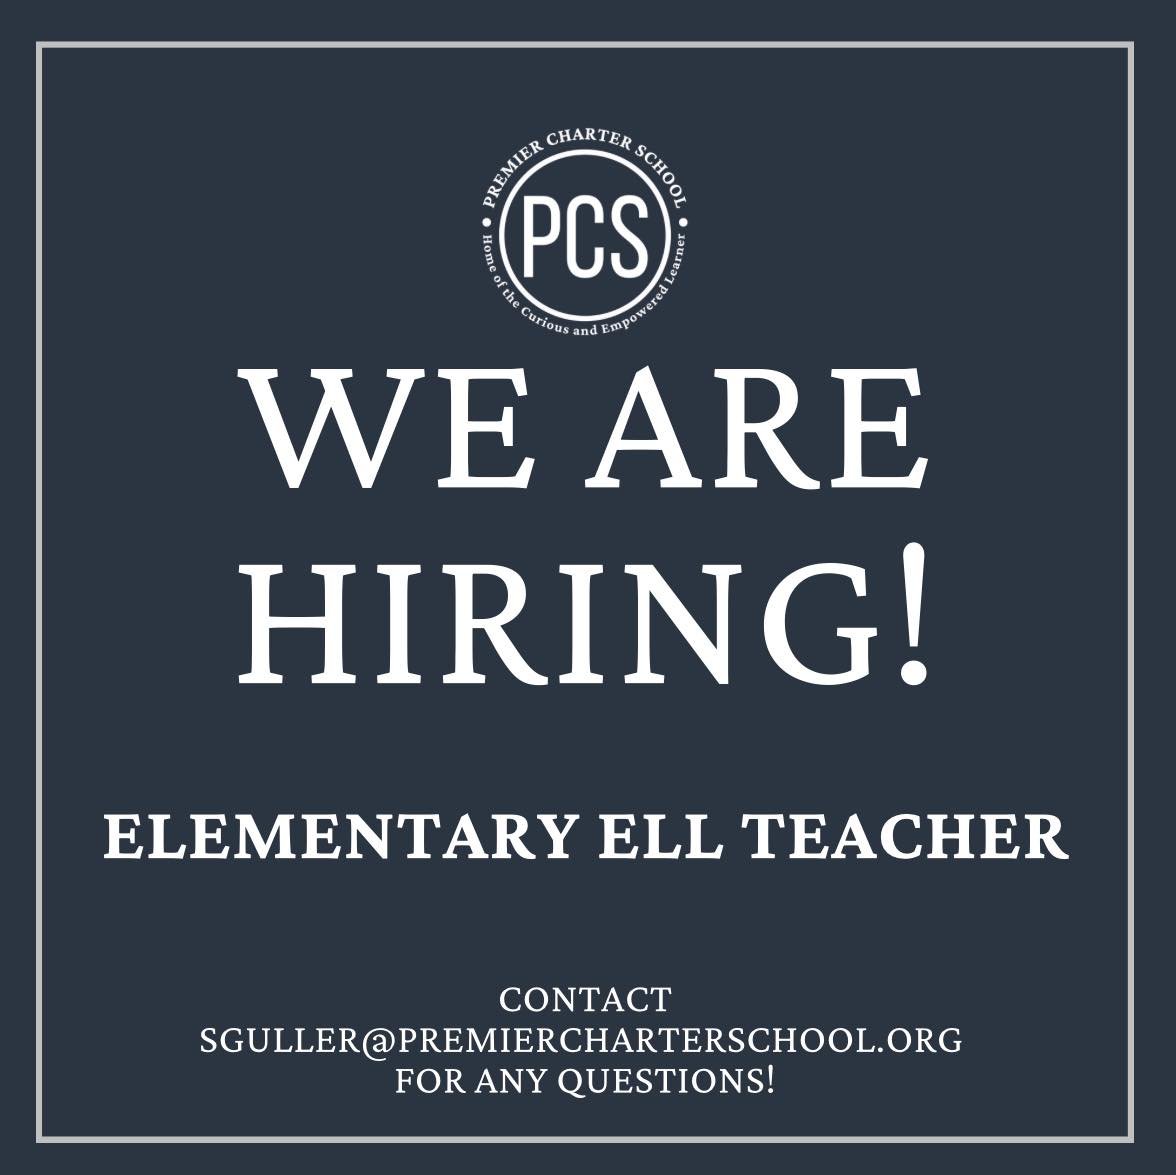 CALLING ALL EDUCATORS—
Premier Charter School is hiring an Elementary ELL Teacher for the 2024-2025 school year! 

This ELL teacher will be part of an ELL Teacher team (3 in Elementary and 1 in middle school) and will be co-teaching in multiple